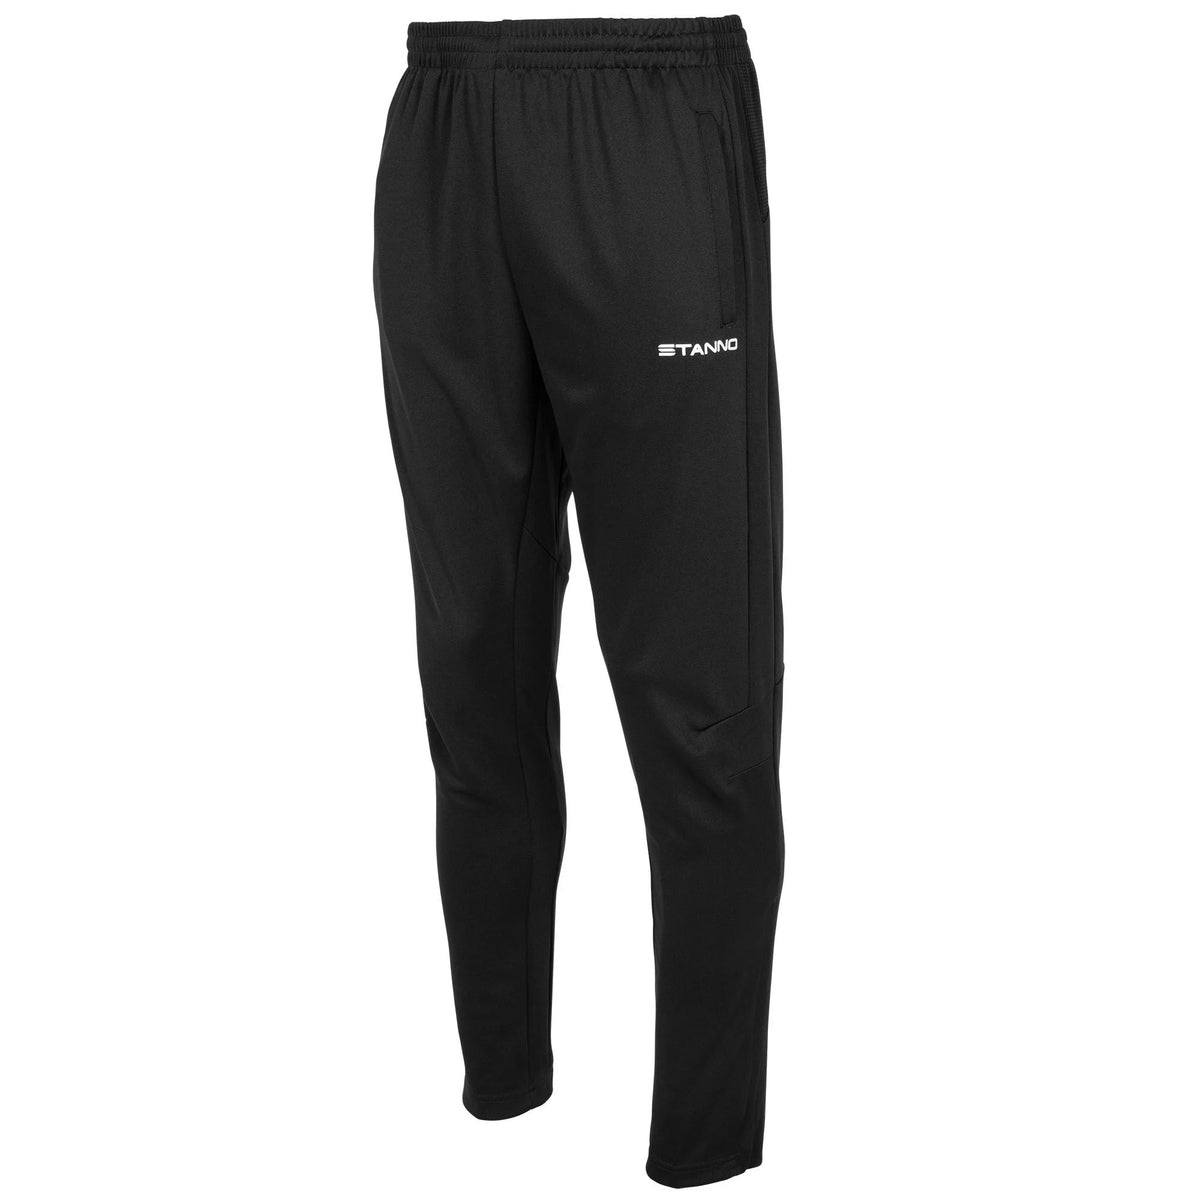 AG Hingham Stanno Pride Tracksuit Bottoms in Adult